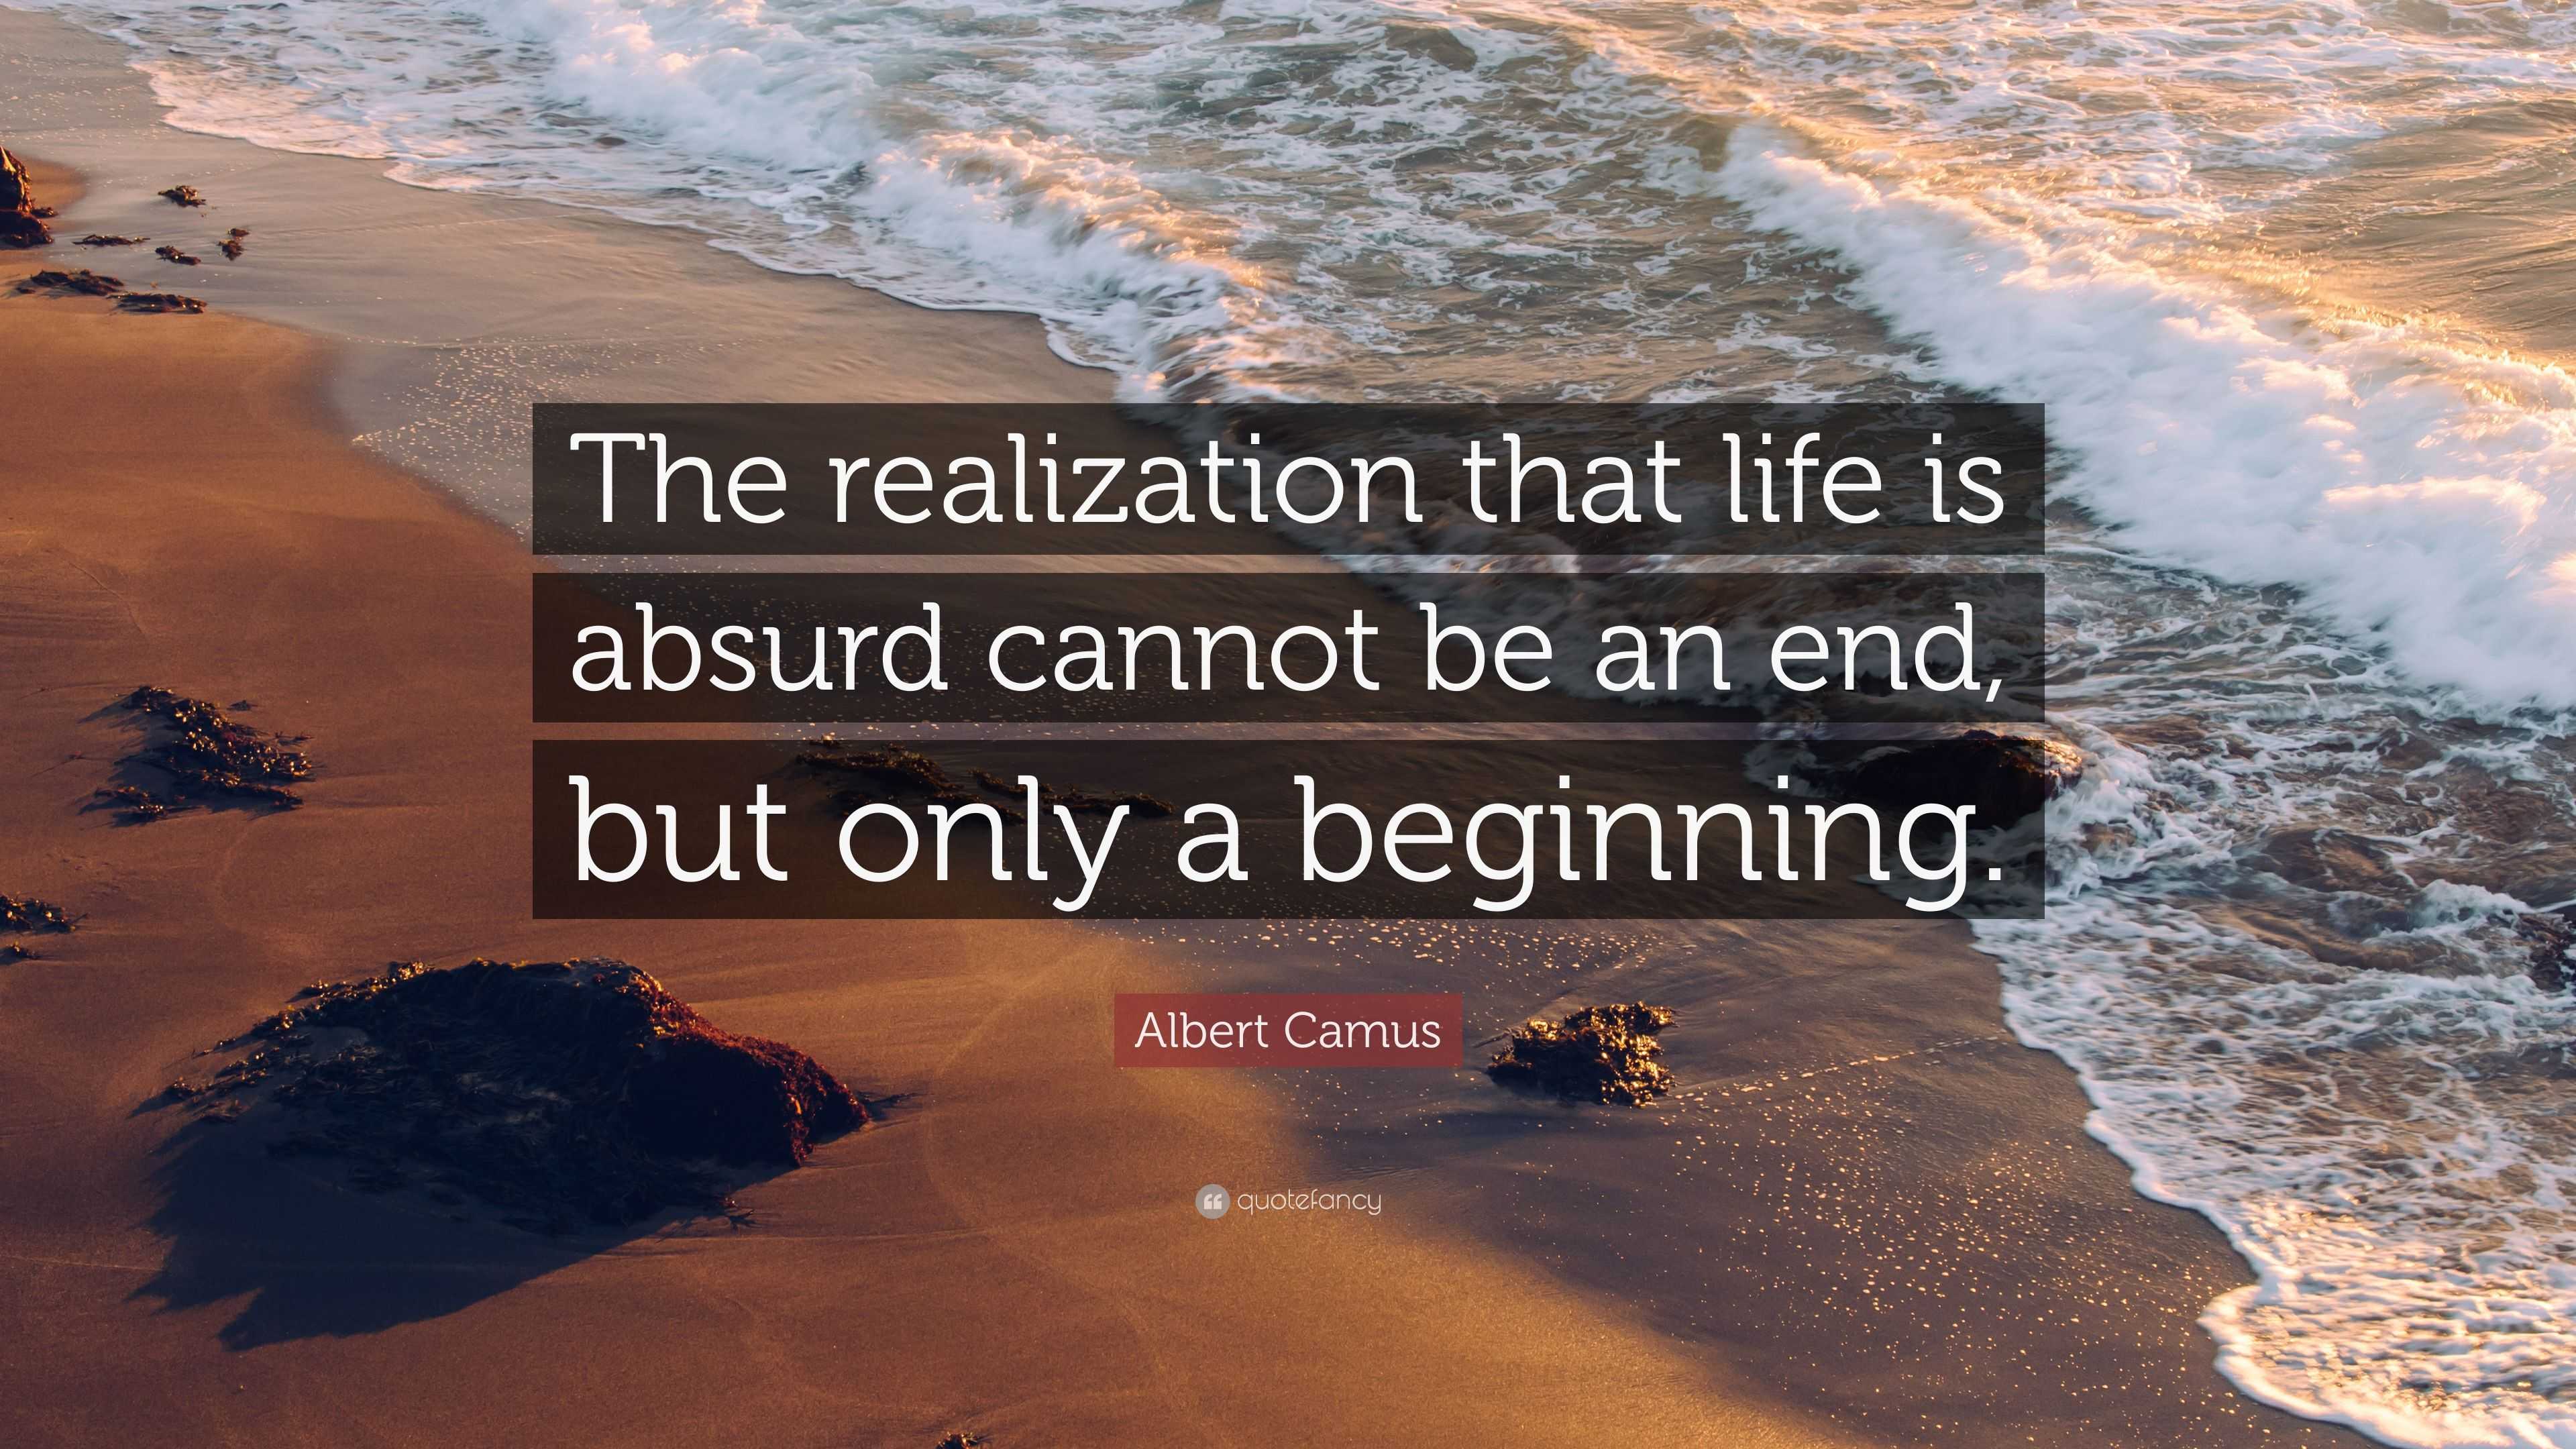 Albert Camus Quote The Realization That Life Is Absurd Cannot Be An